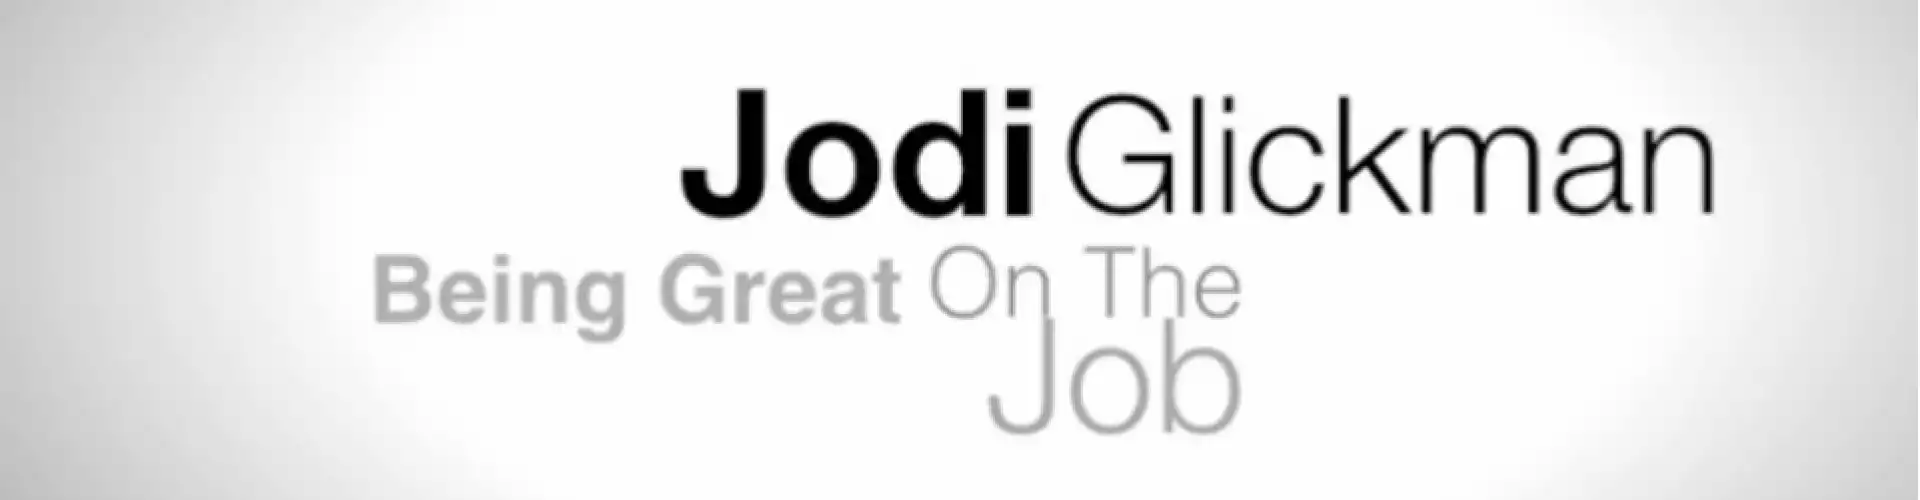 Great on the Job - Client Workshop